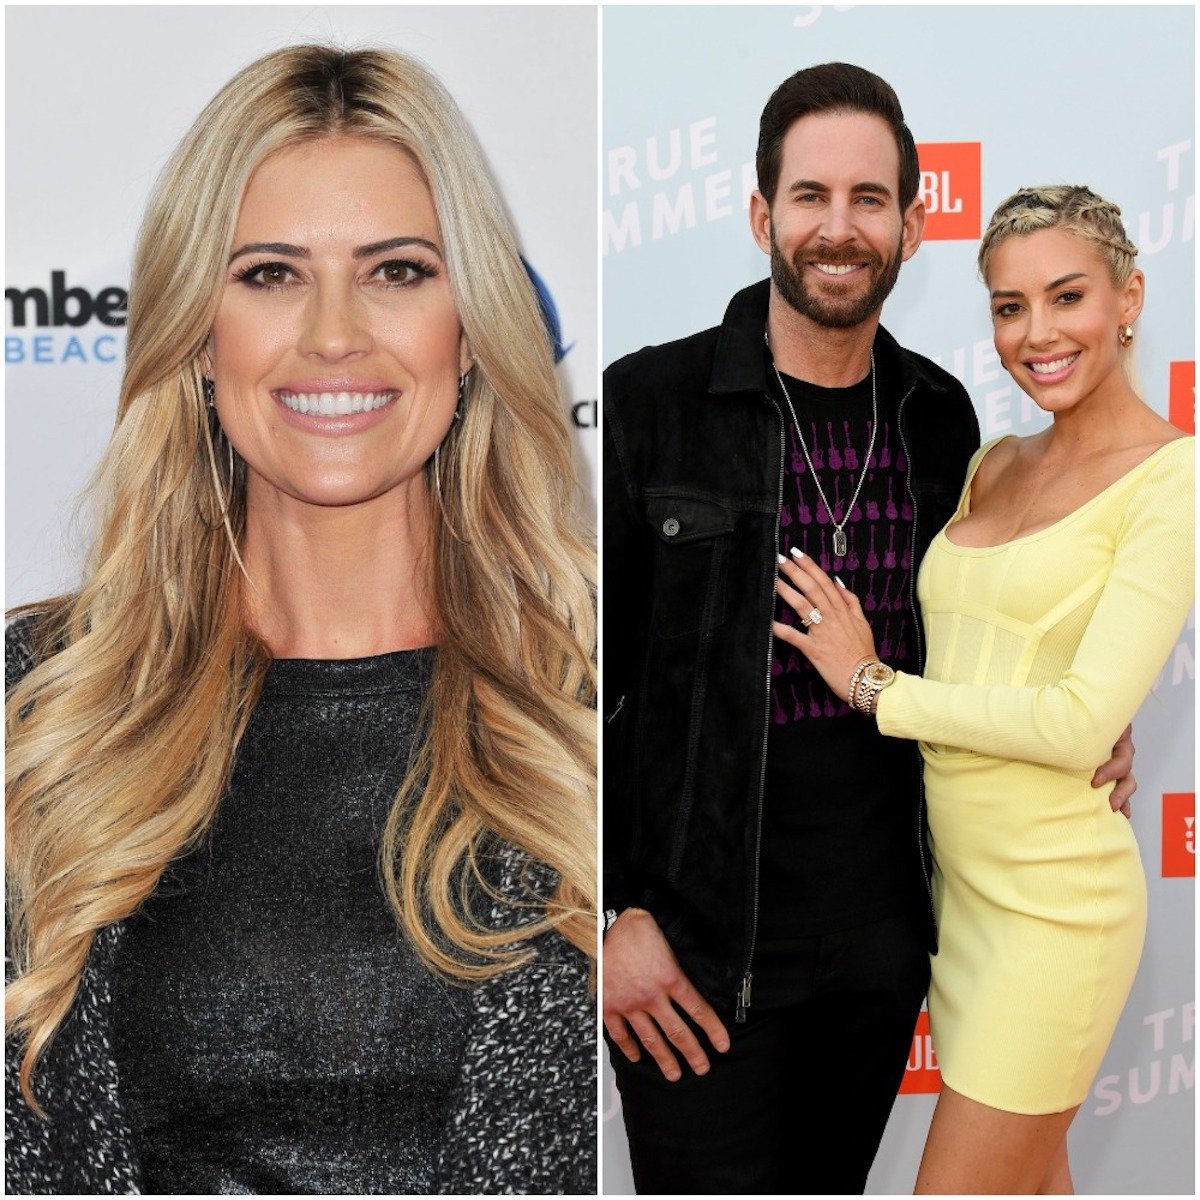 Left: Christina Haack in 2019; right: Tarek El Moussa and Heather Rae Young pose together in 2021